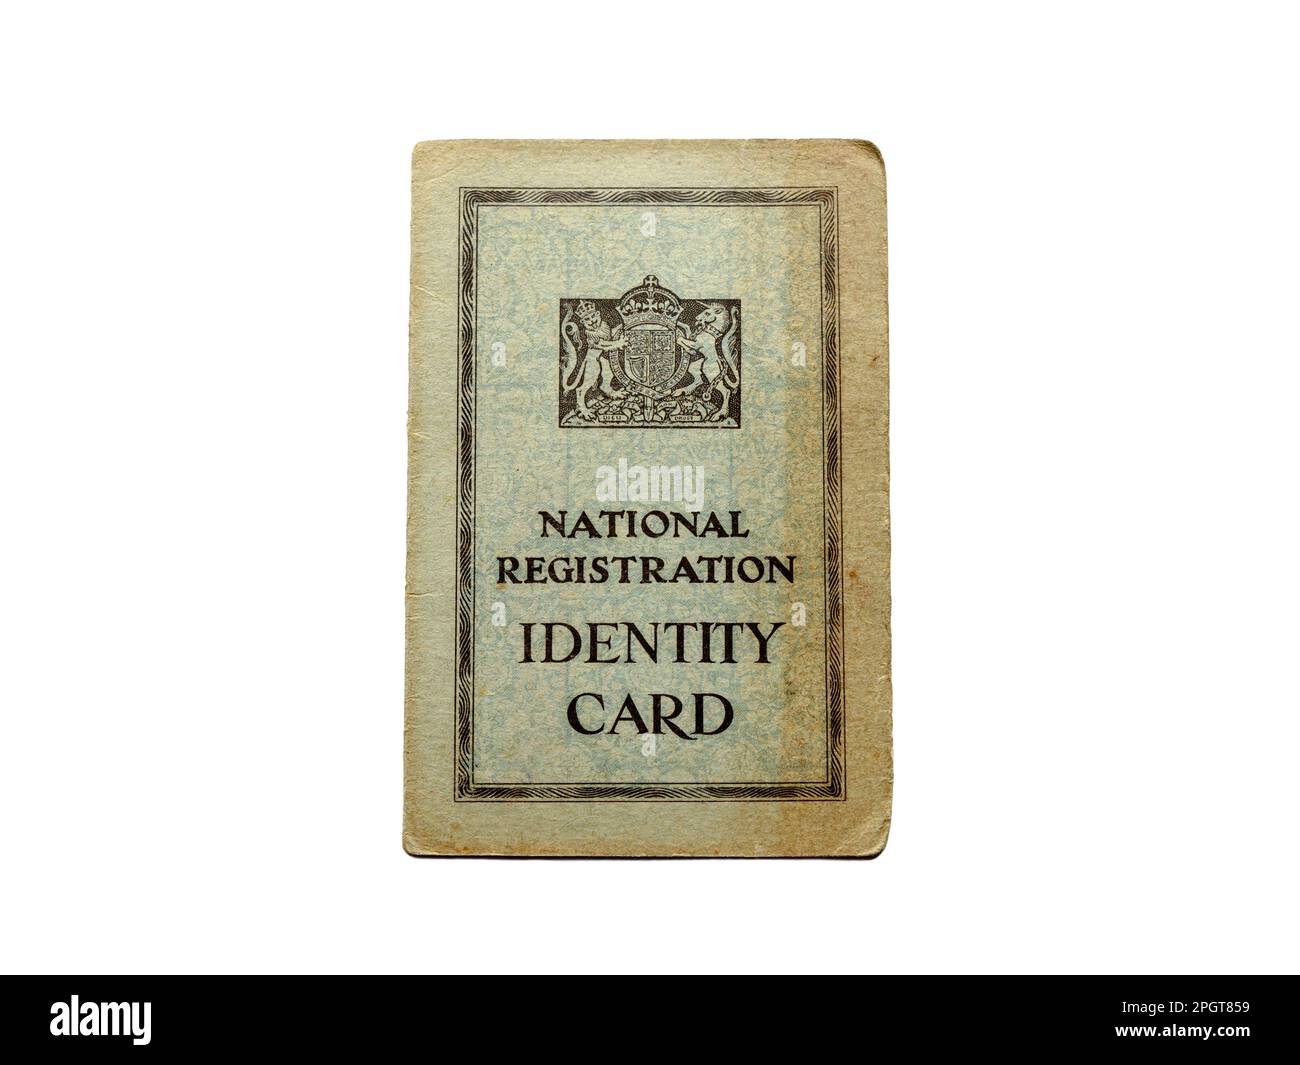 A UK Natio0nal Registration identity card from 1950, isolated against a white background Stock Photo